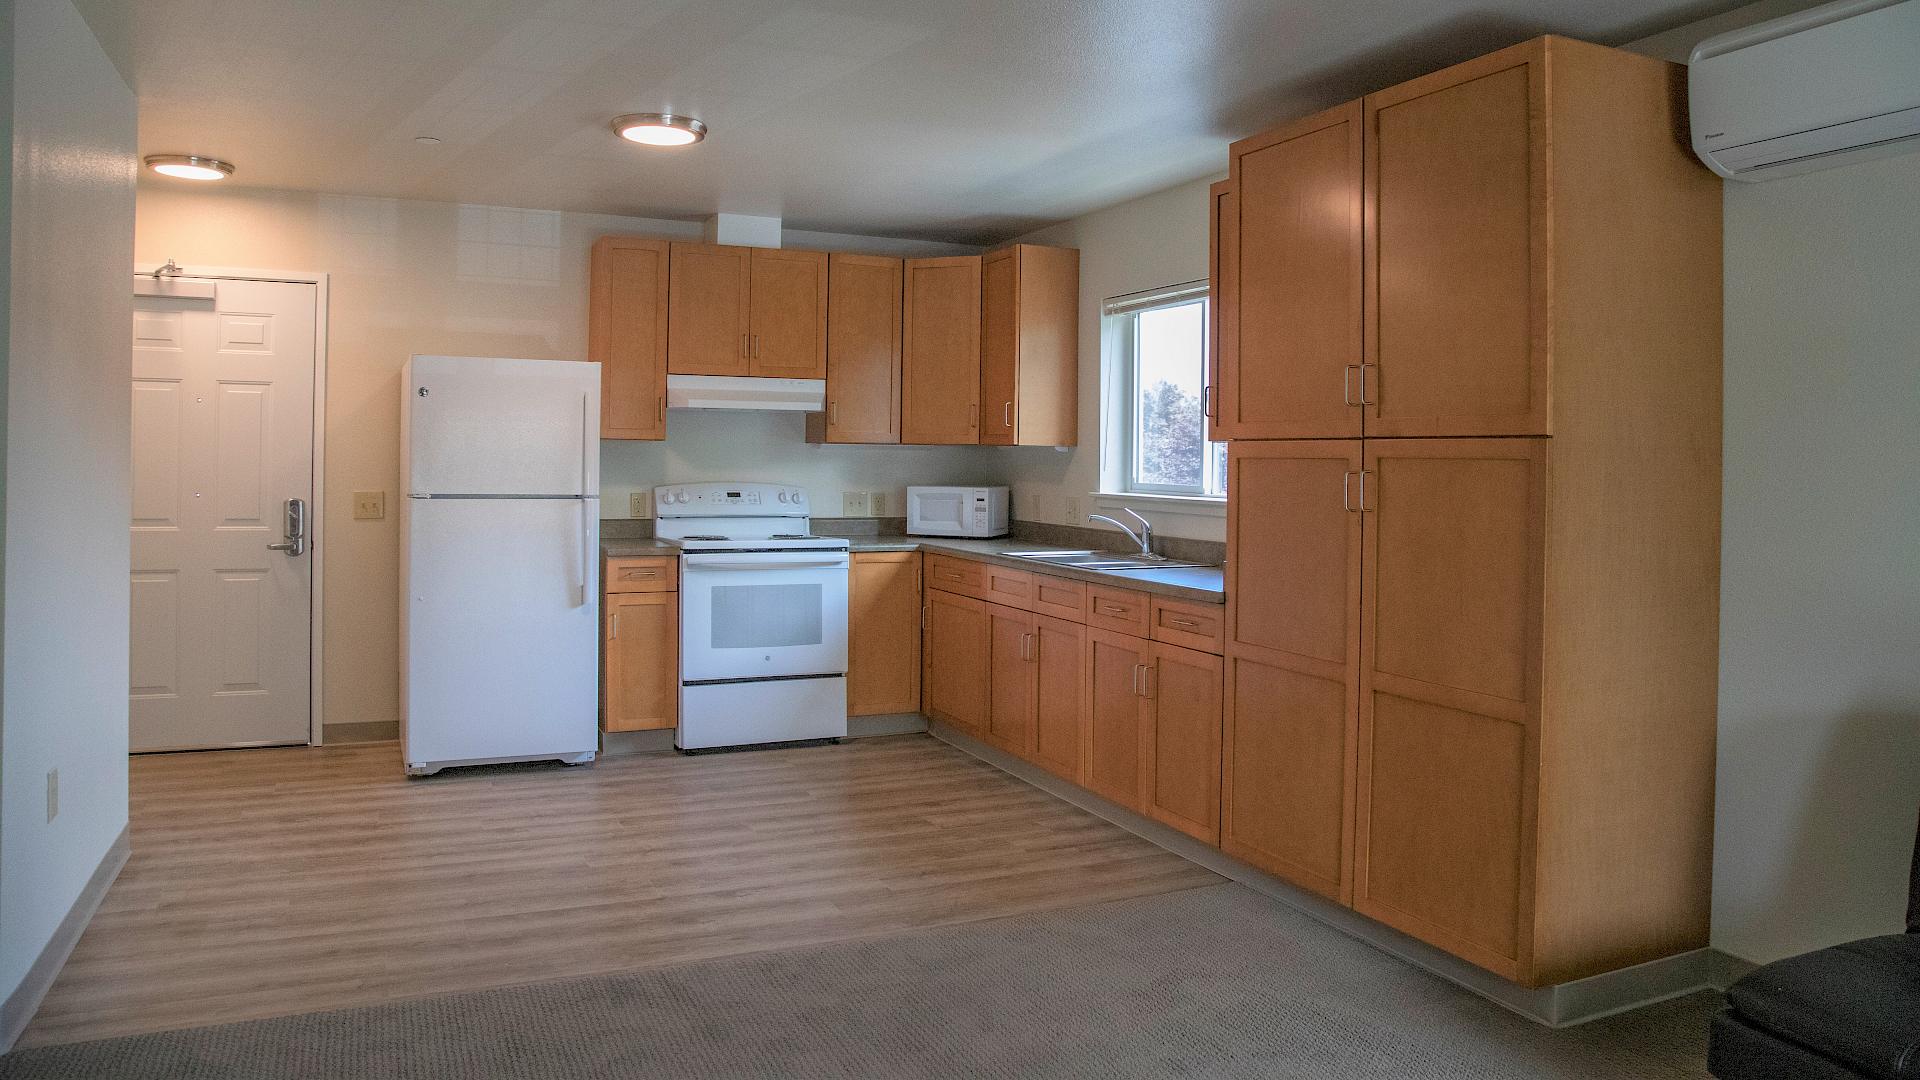 One of the kitchens in our 1 bedroom unit. slide image